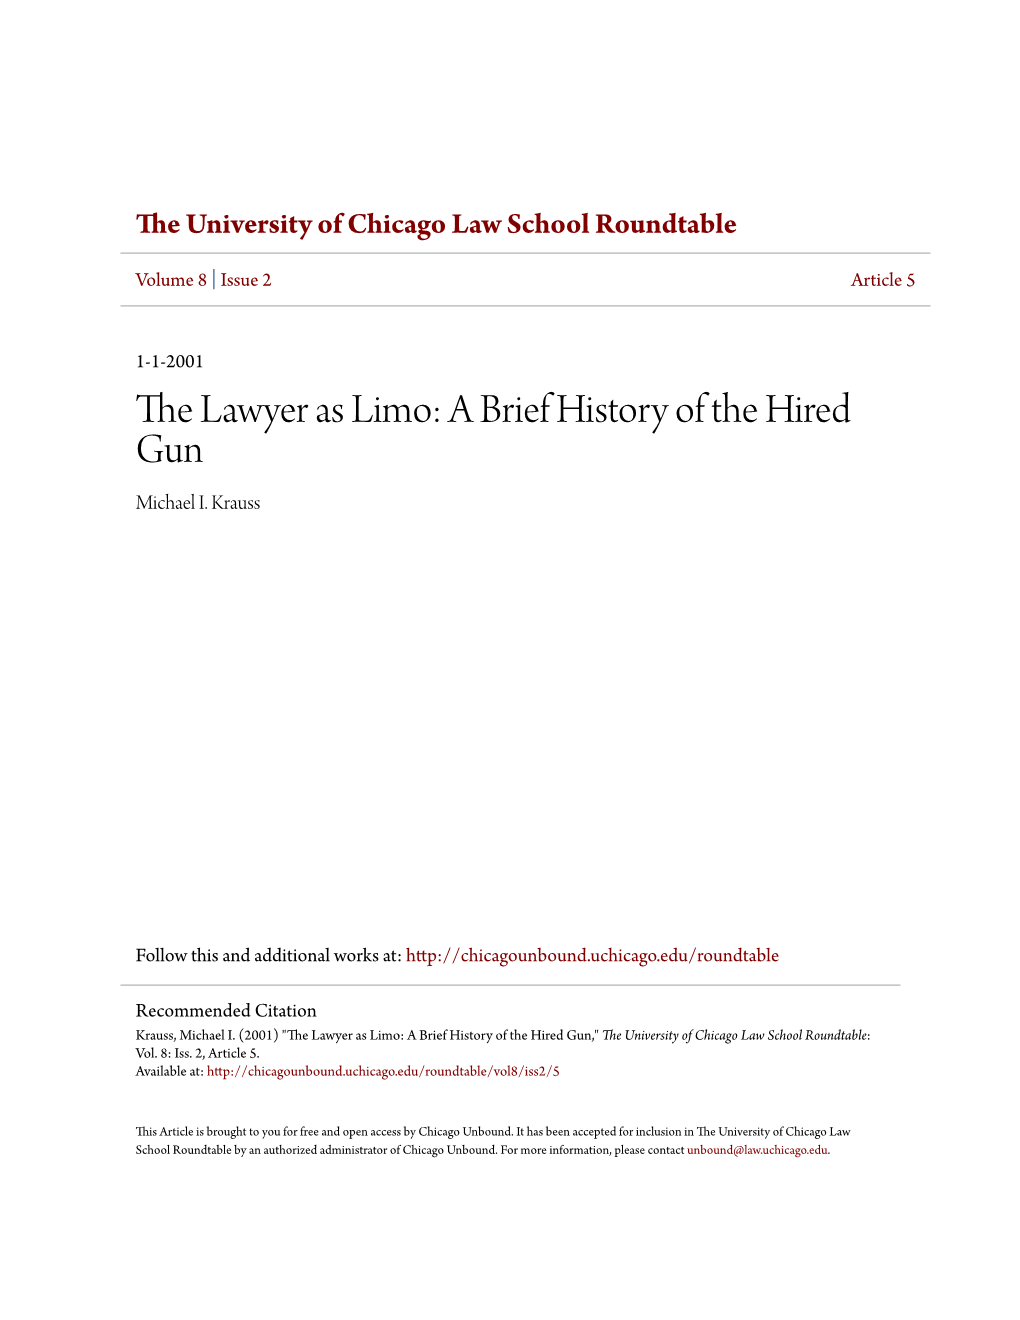 The Lawyer As Limo: a Brief History of the Hired Gun Michael I